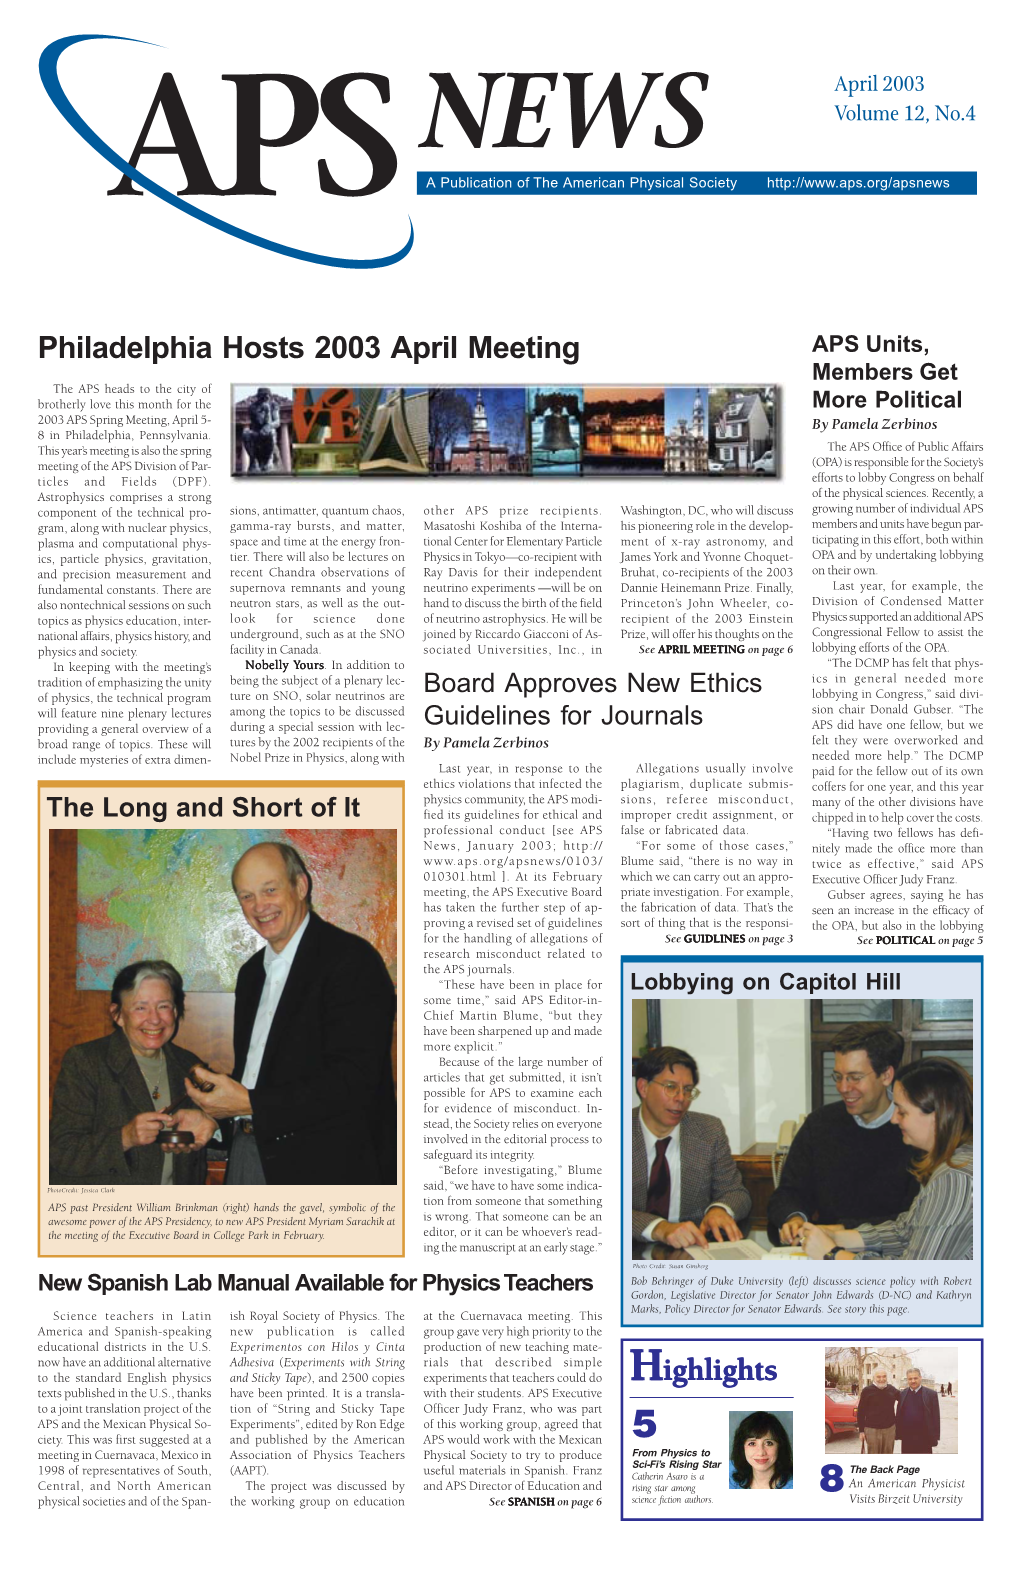 April 2003 NEWS Volume 12, No.4 a Publication of the American Physical Society